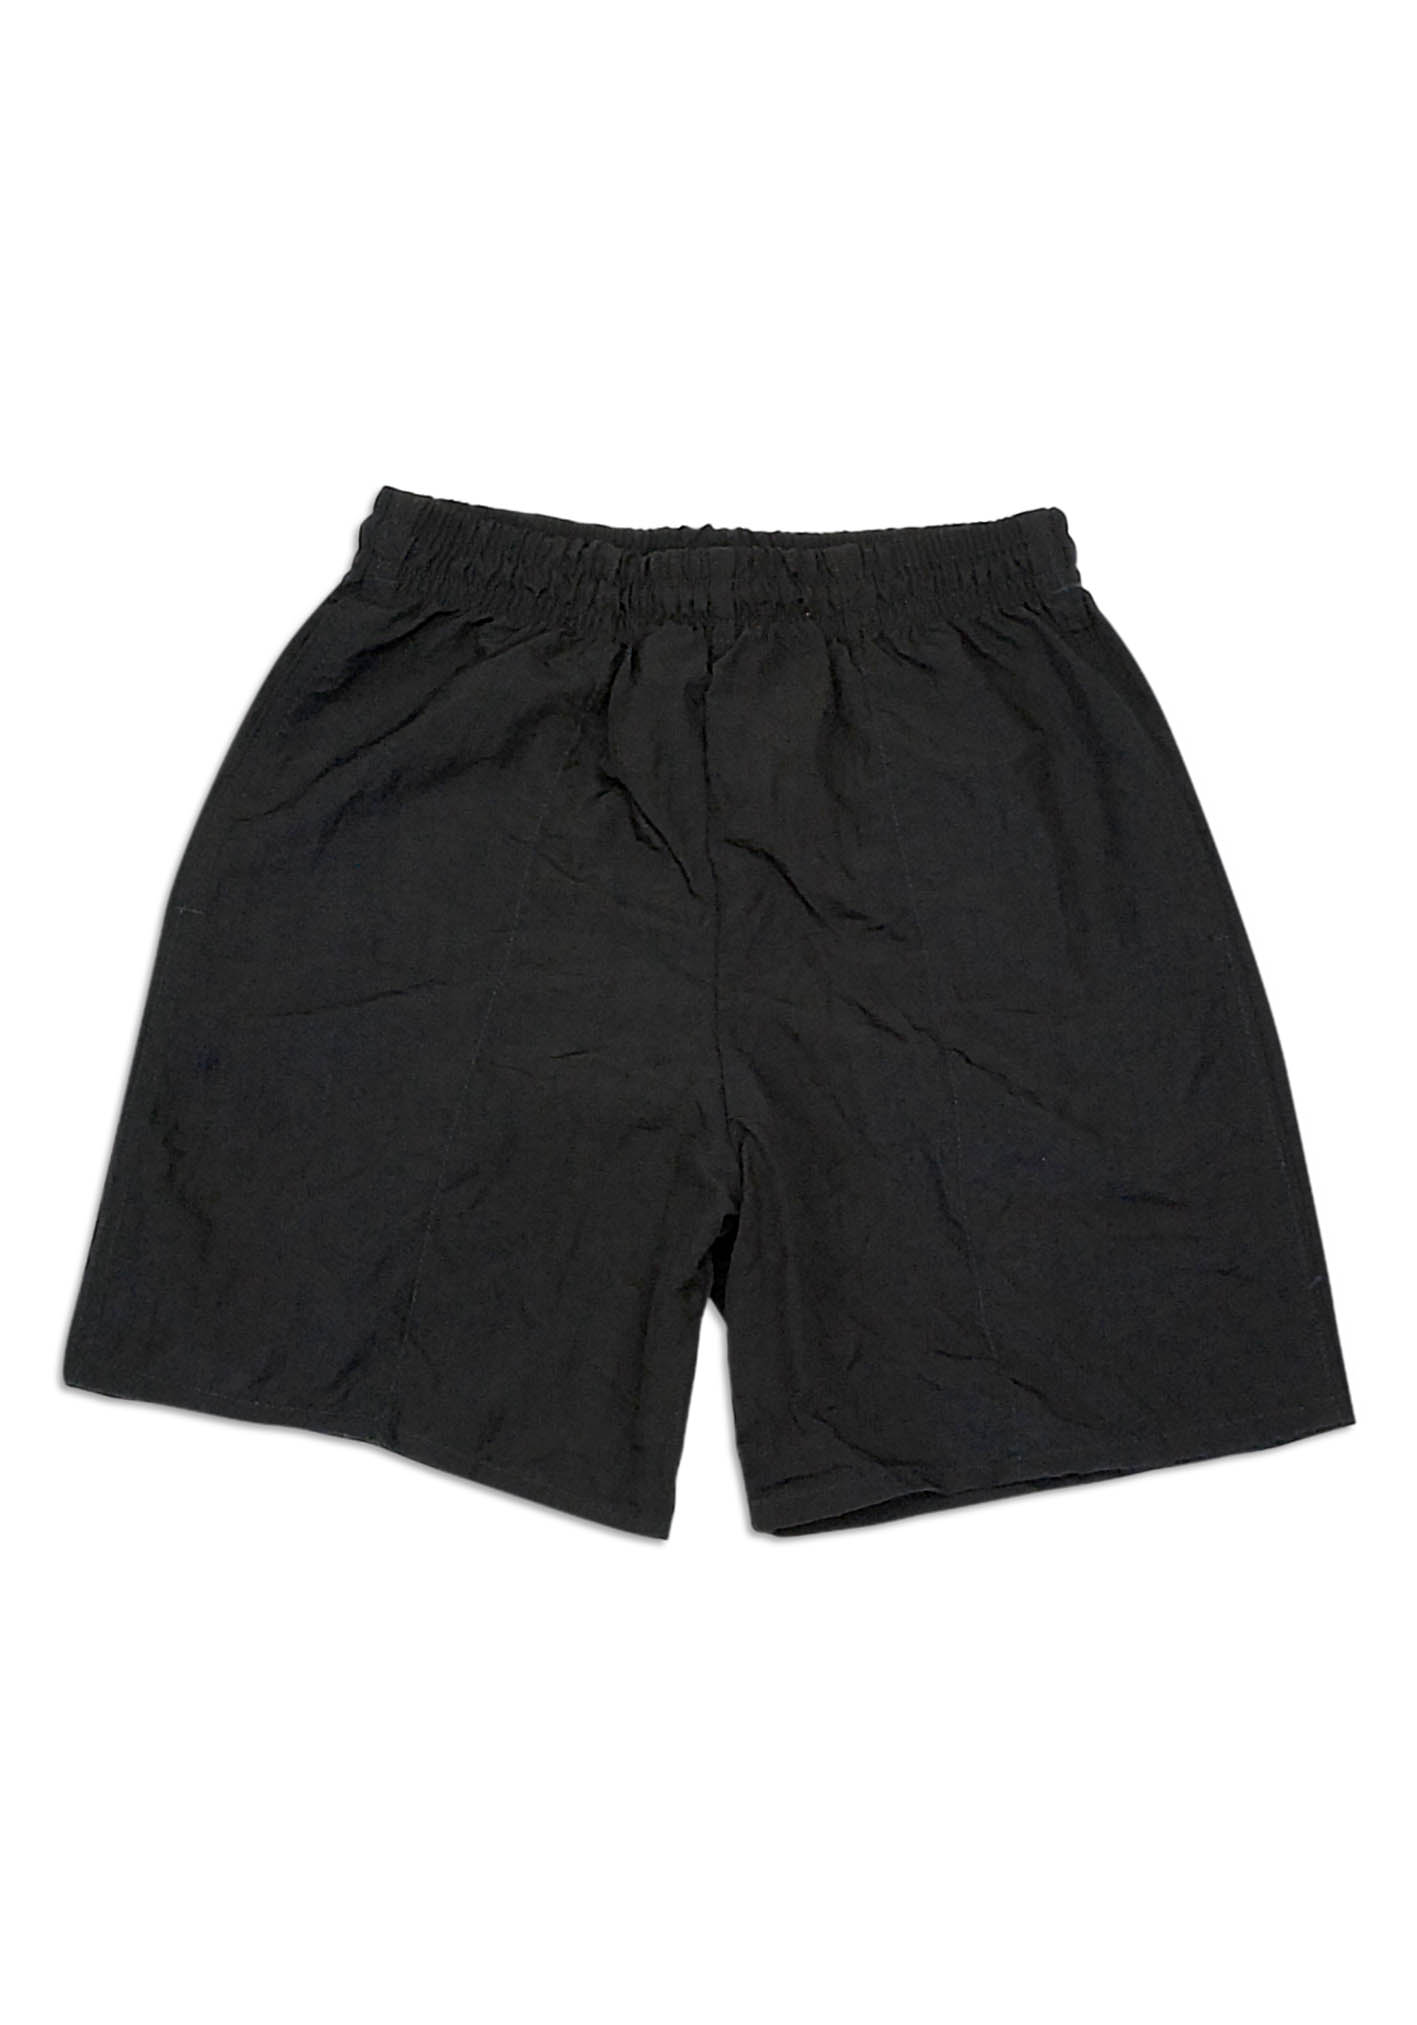 Ryde East Unisex Microfibre Sports Shorts | Shop at Pickles Schoolwear ...